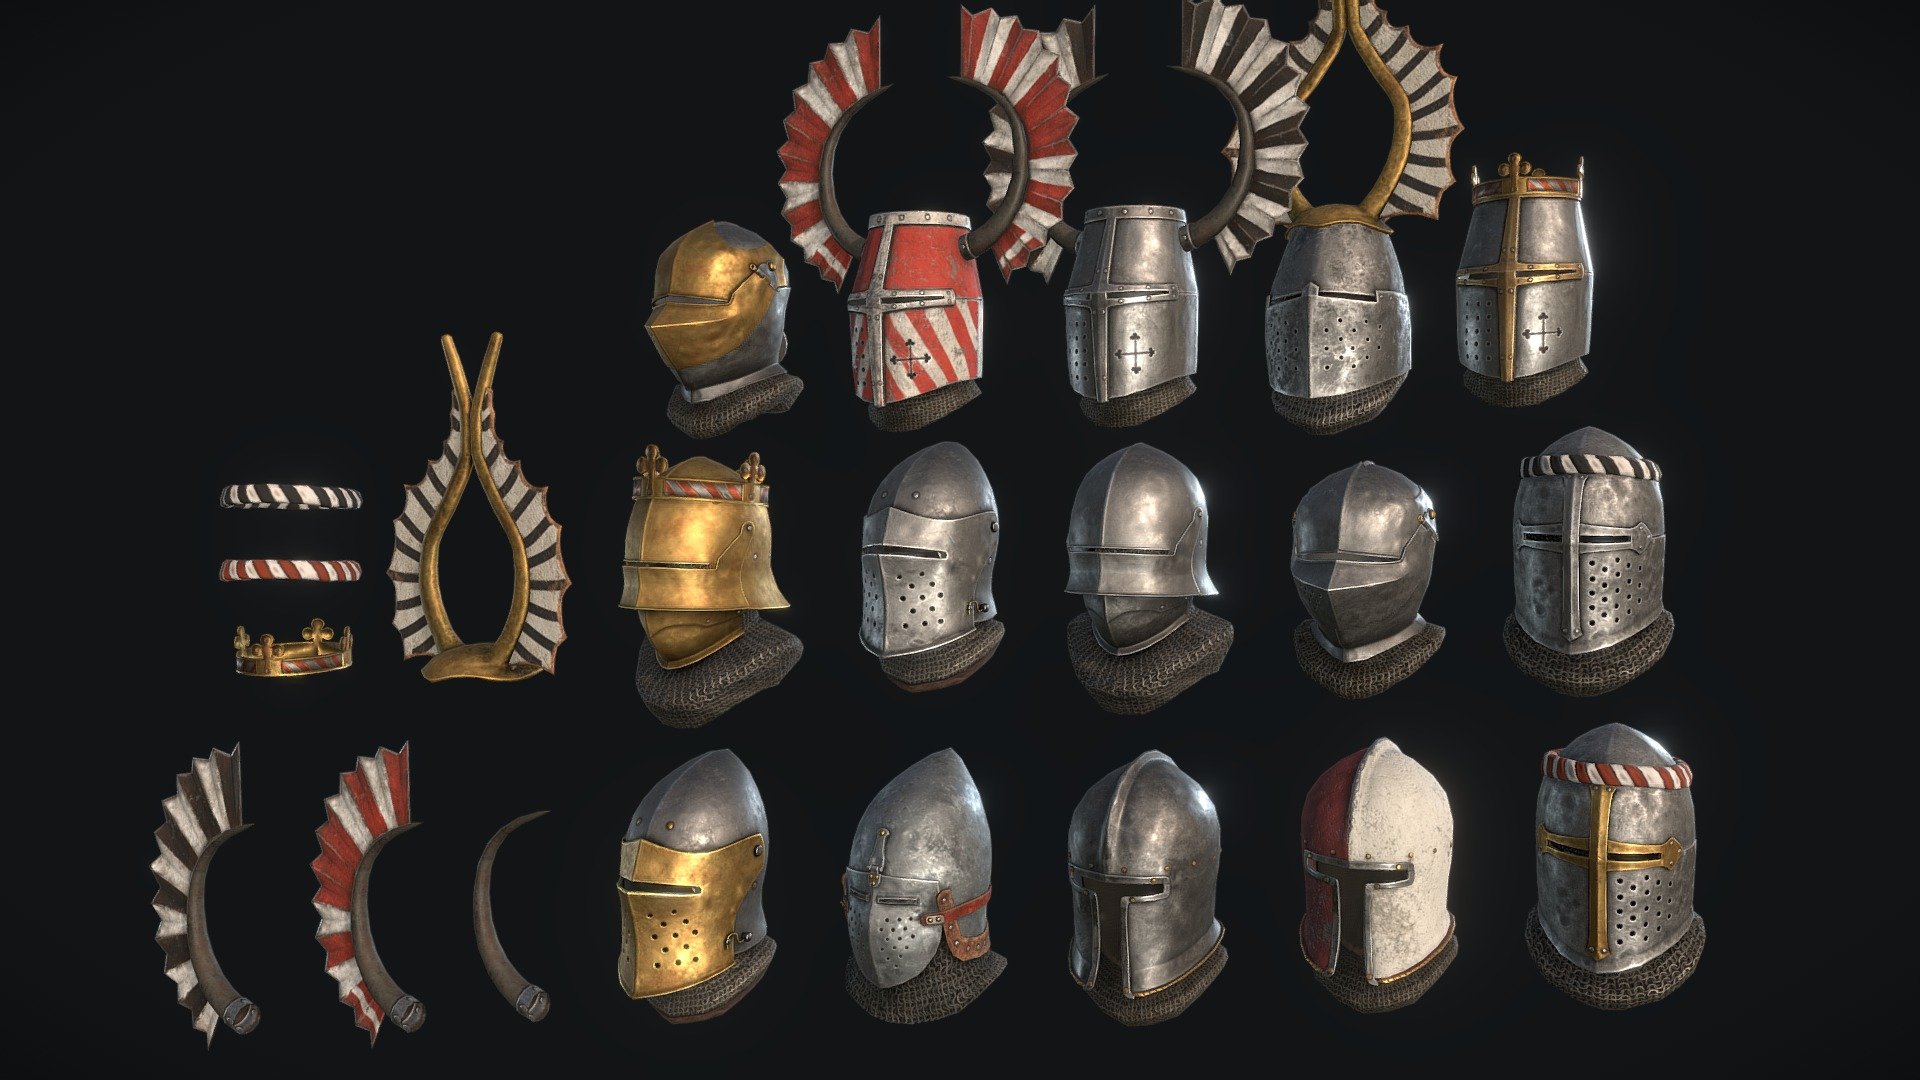 a collection of late medieval helmets i made.
all textures are in 1  8k atlas map for ease of use.
all helmets are low poly and game ready
feel free to post feedback or ask questions!
Armour pack incomming - medieval helmets - Buy Royalty Free 3D model by adamnsexyname (Pieter) (@adamnsexyname) 3d model